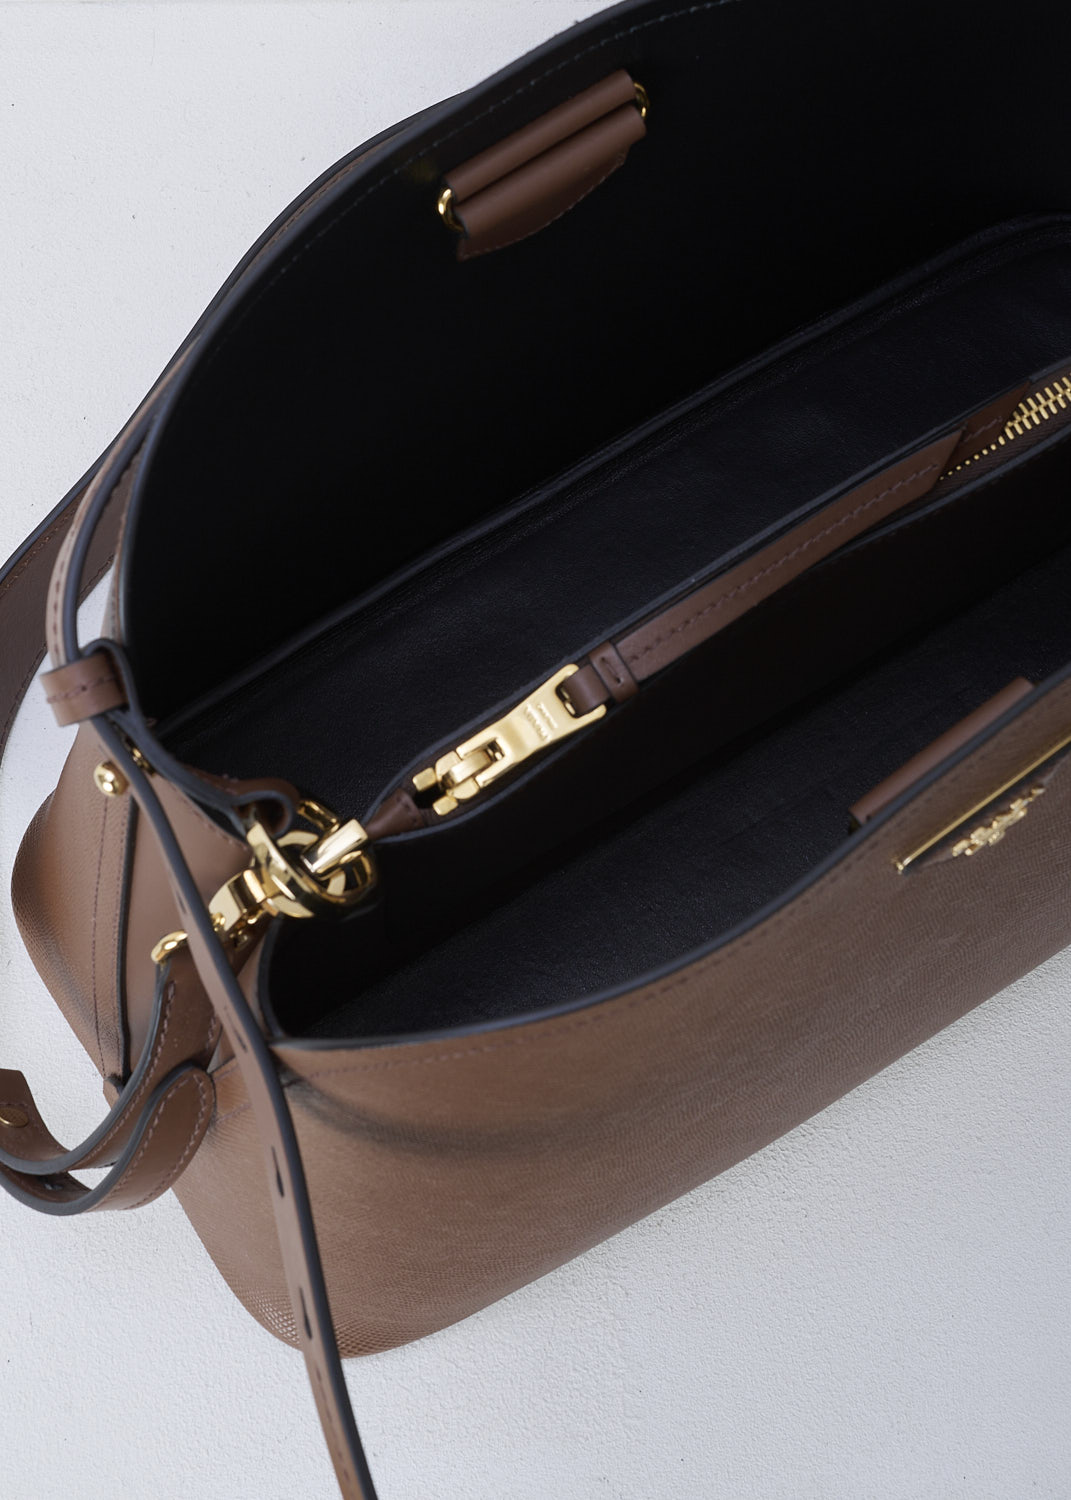 PRADA, MEDIUM MATINÃ‰E SHOULDER BAG IN BROWN, SAFFIANO_CUIR_C_1BA249_PALISSANDRO_NERO, Brown, Detail 1, This brown MatinÃ©e shoulder bag is made with Saffiano leather. Both the leather handle and shoulder strap are adjustable and detachable. The bag has gold-tone metal hardware with the brand's triangle logo plaque on the front. The open top has a magnetic snap closure in the middle. The black interior has a centre zip pocket that divides the main compartment into two spacious sides. The bag has a removable leather keychain.  



